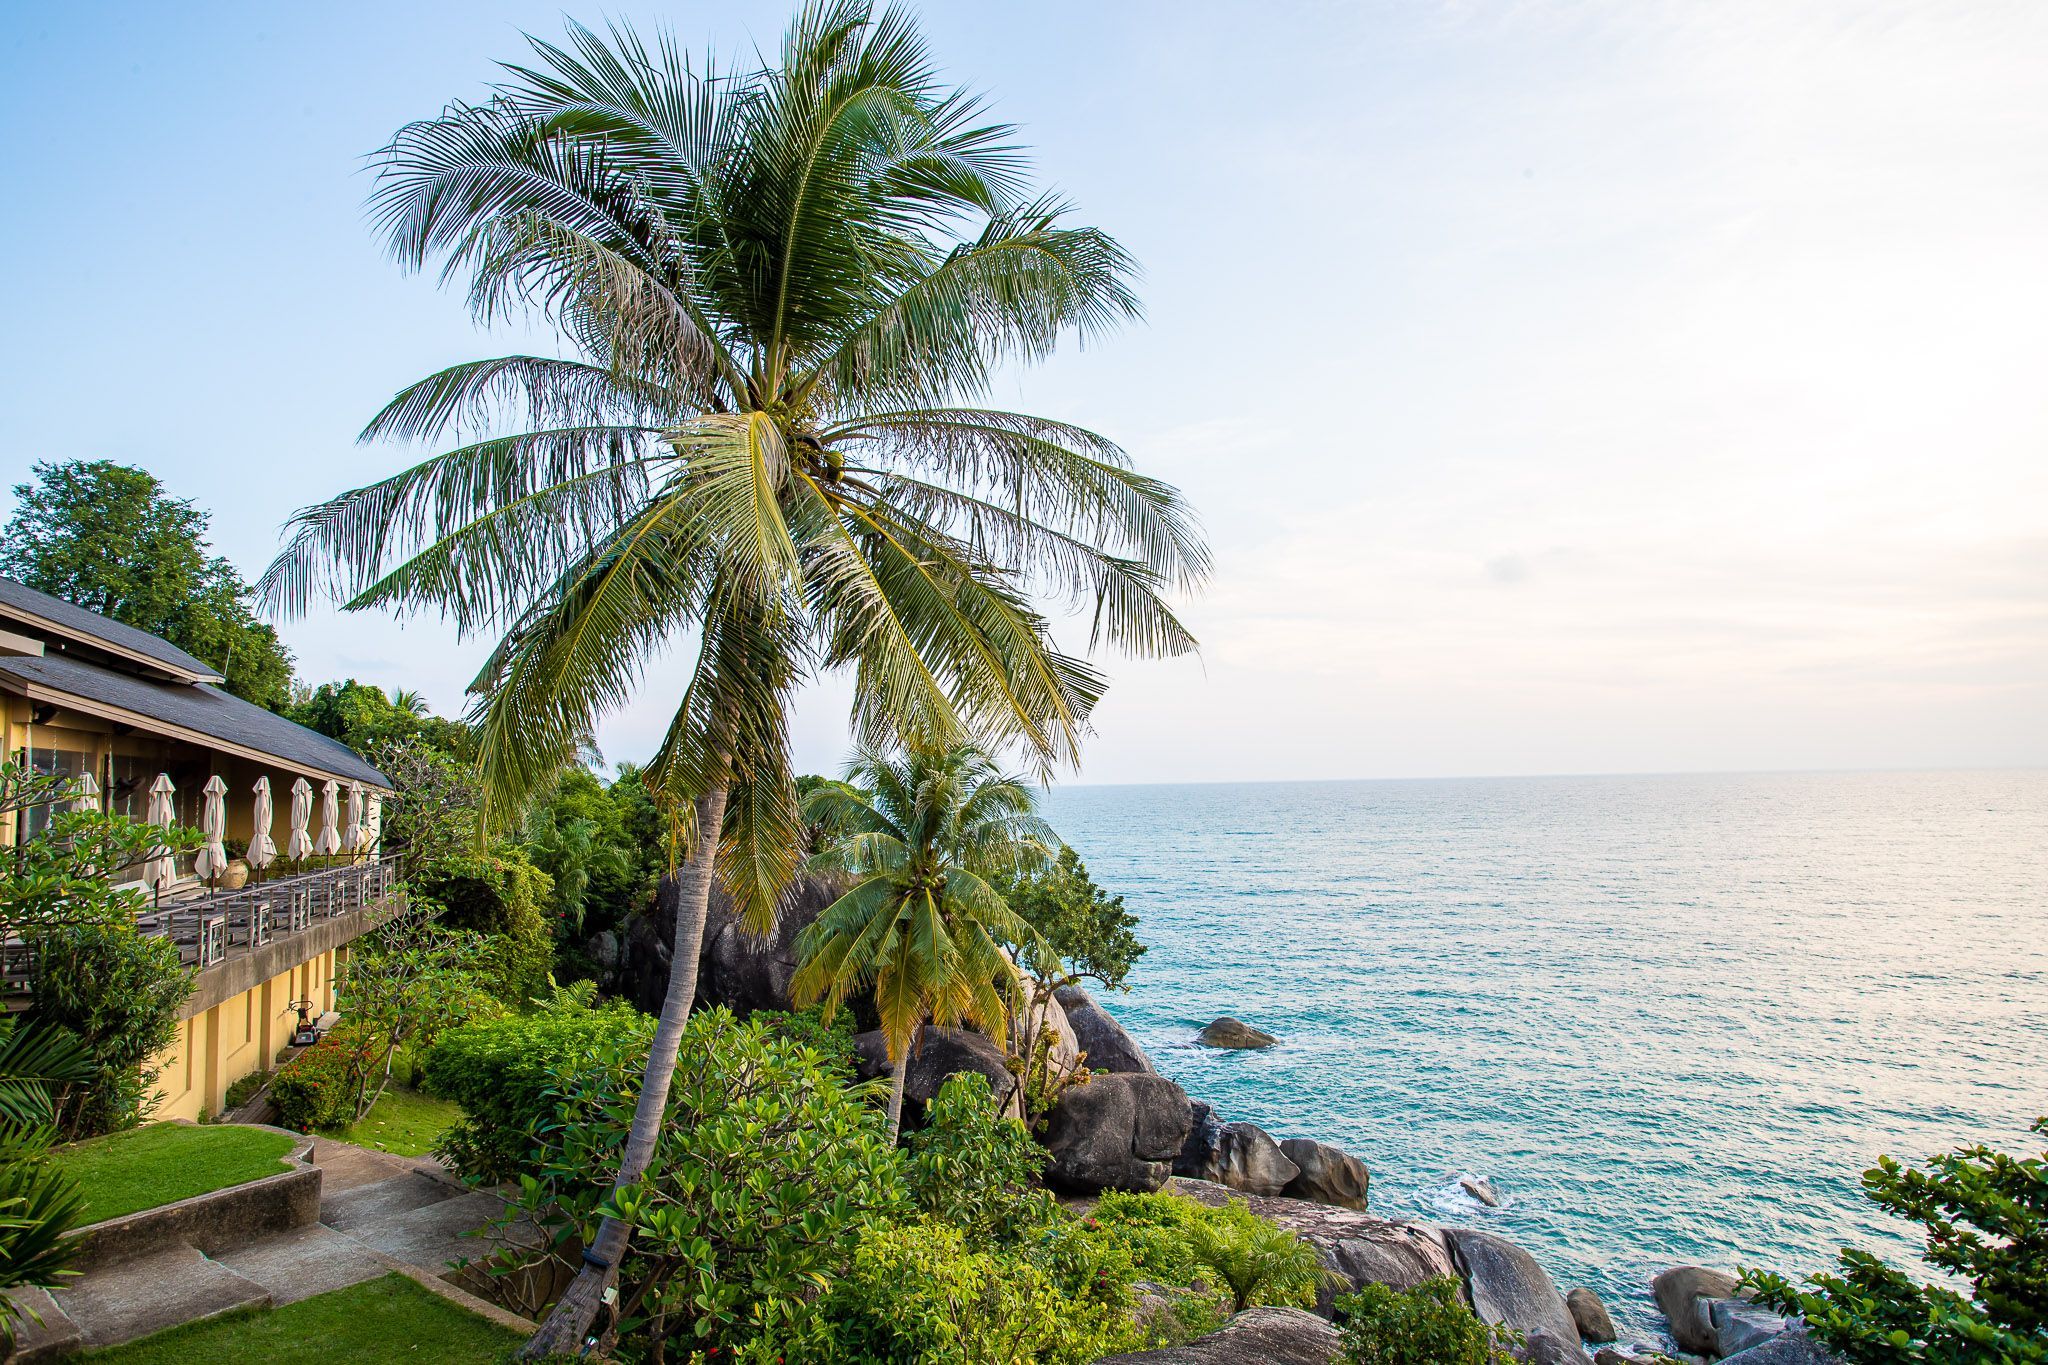 Stunning view across ocean and cliffs from The Cliff Bar and Grill in Koh Samui.